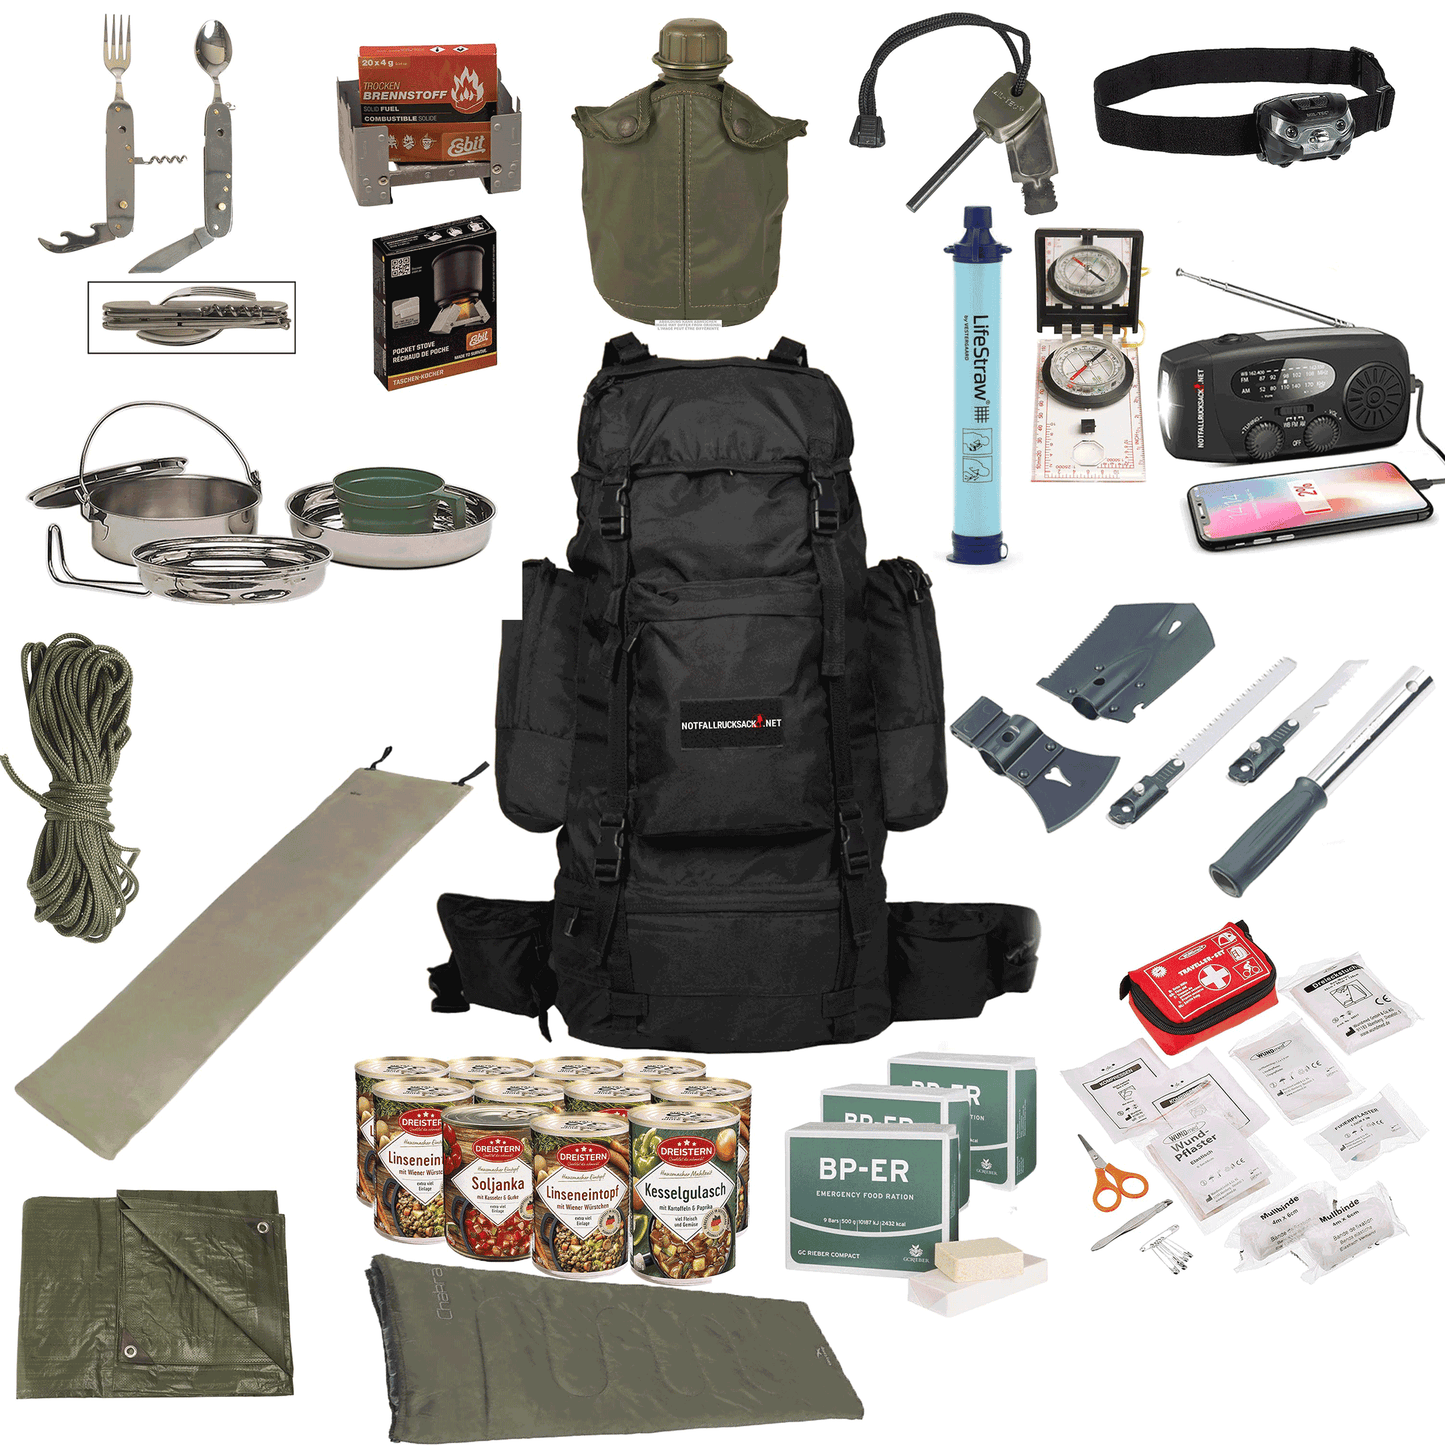 Emergency Backpack Premium - Complete Survival Kit with Solar Radio